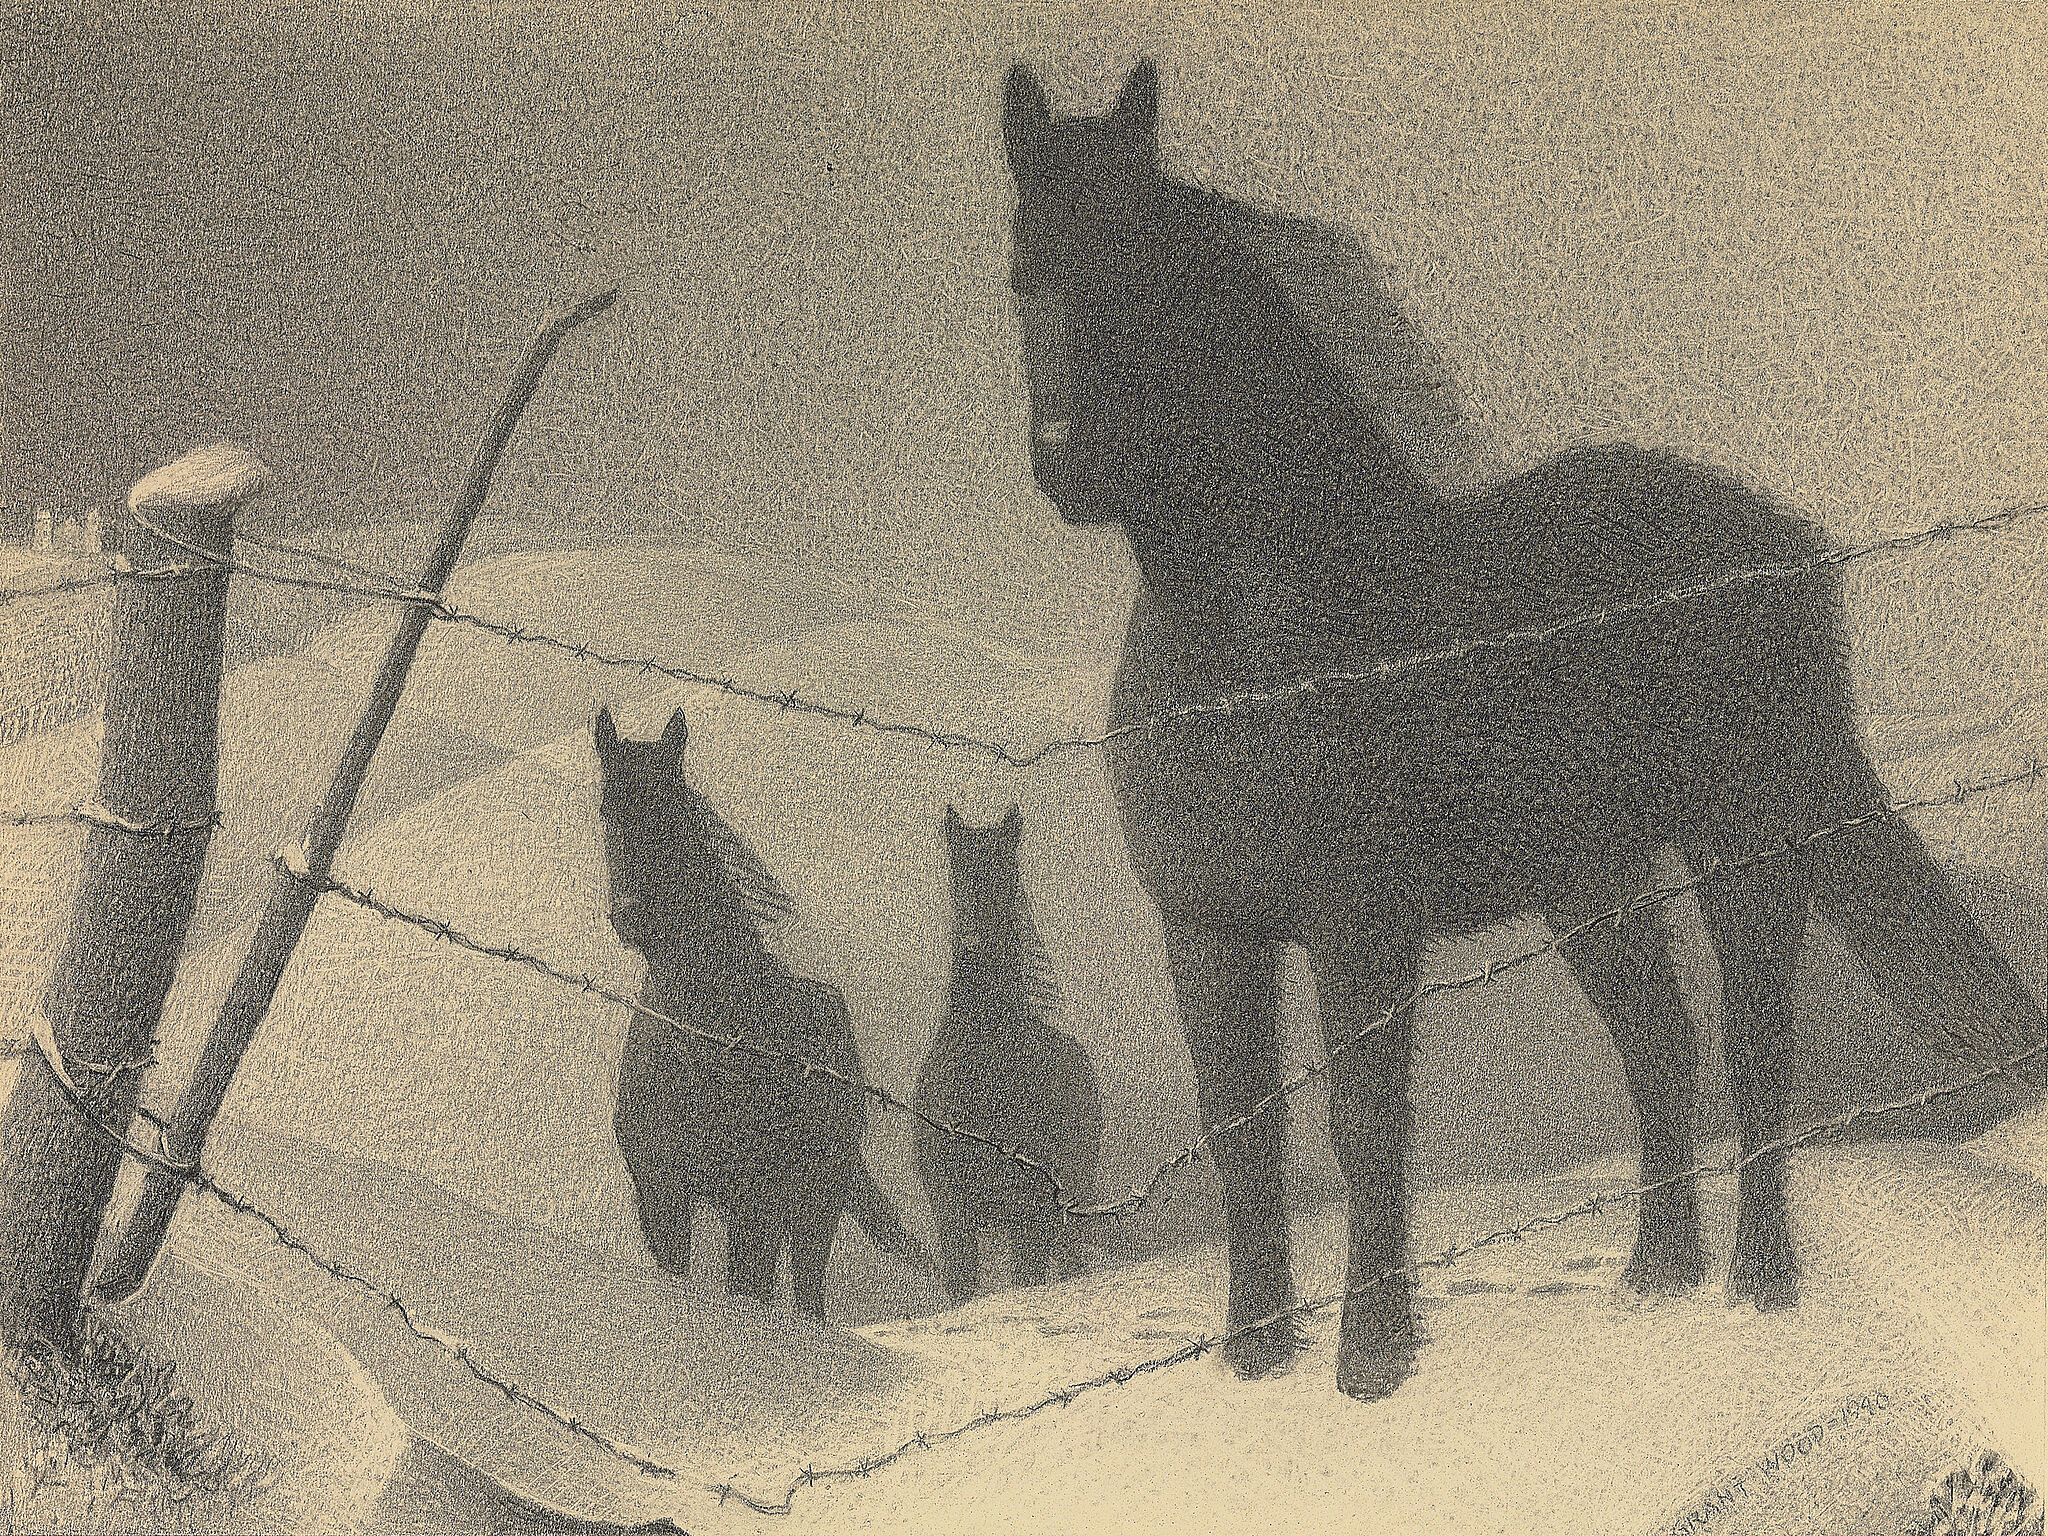 Sketch of three horses standing in snow behind barbed wire fence. 